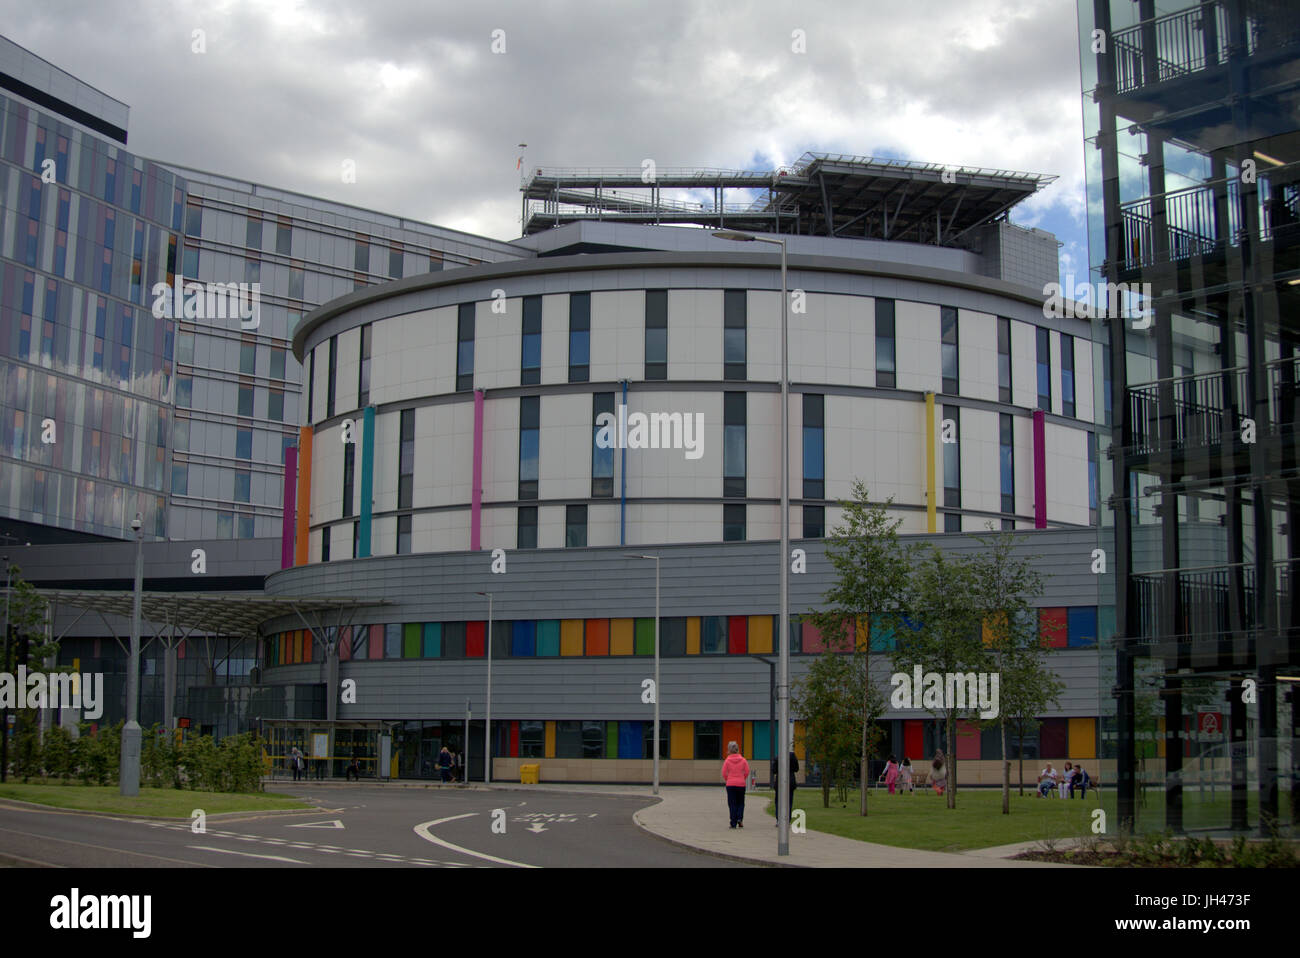 Queen Elizabeth University Hospital,Glasgow  busy Lizzie or death star has the unsafe cladding of Grenfell tower fire tragedy disaster Stock Photo